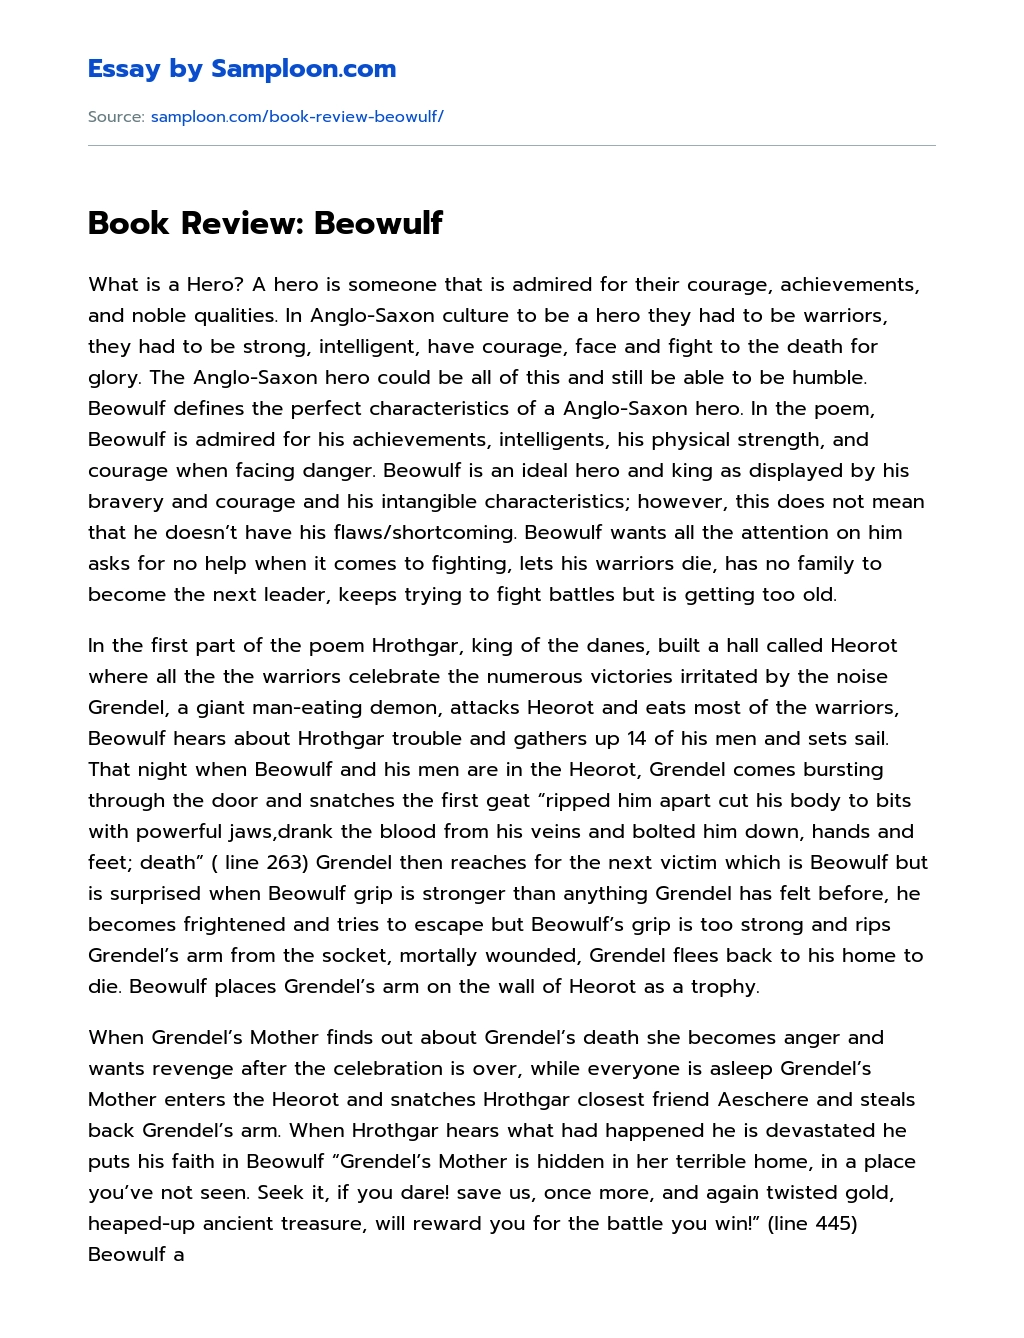 Book Review: Beowulf essay